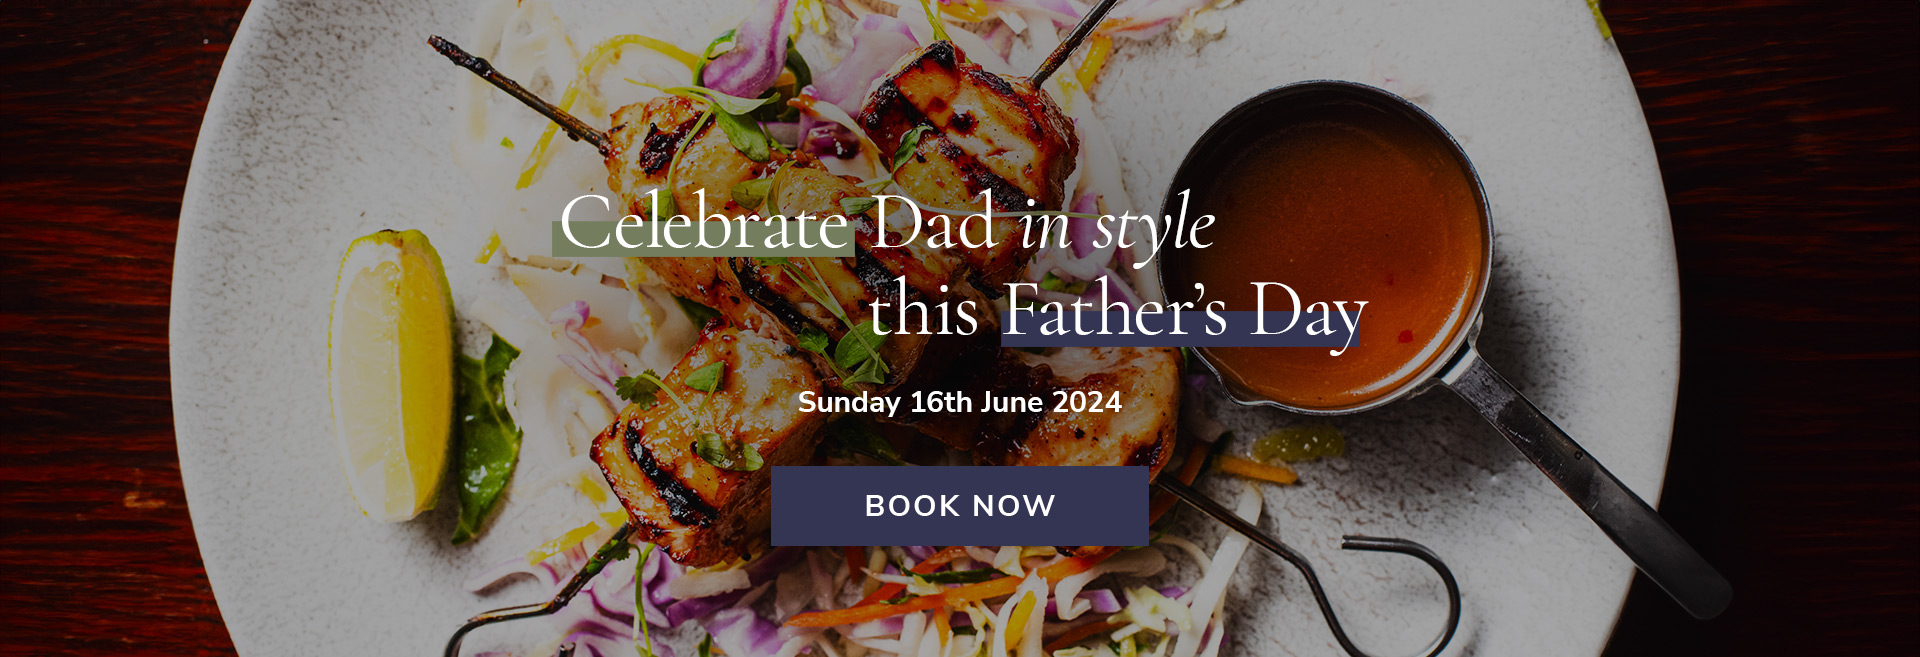 Father's Day at The Drayton Arms